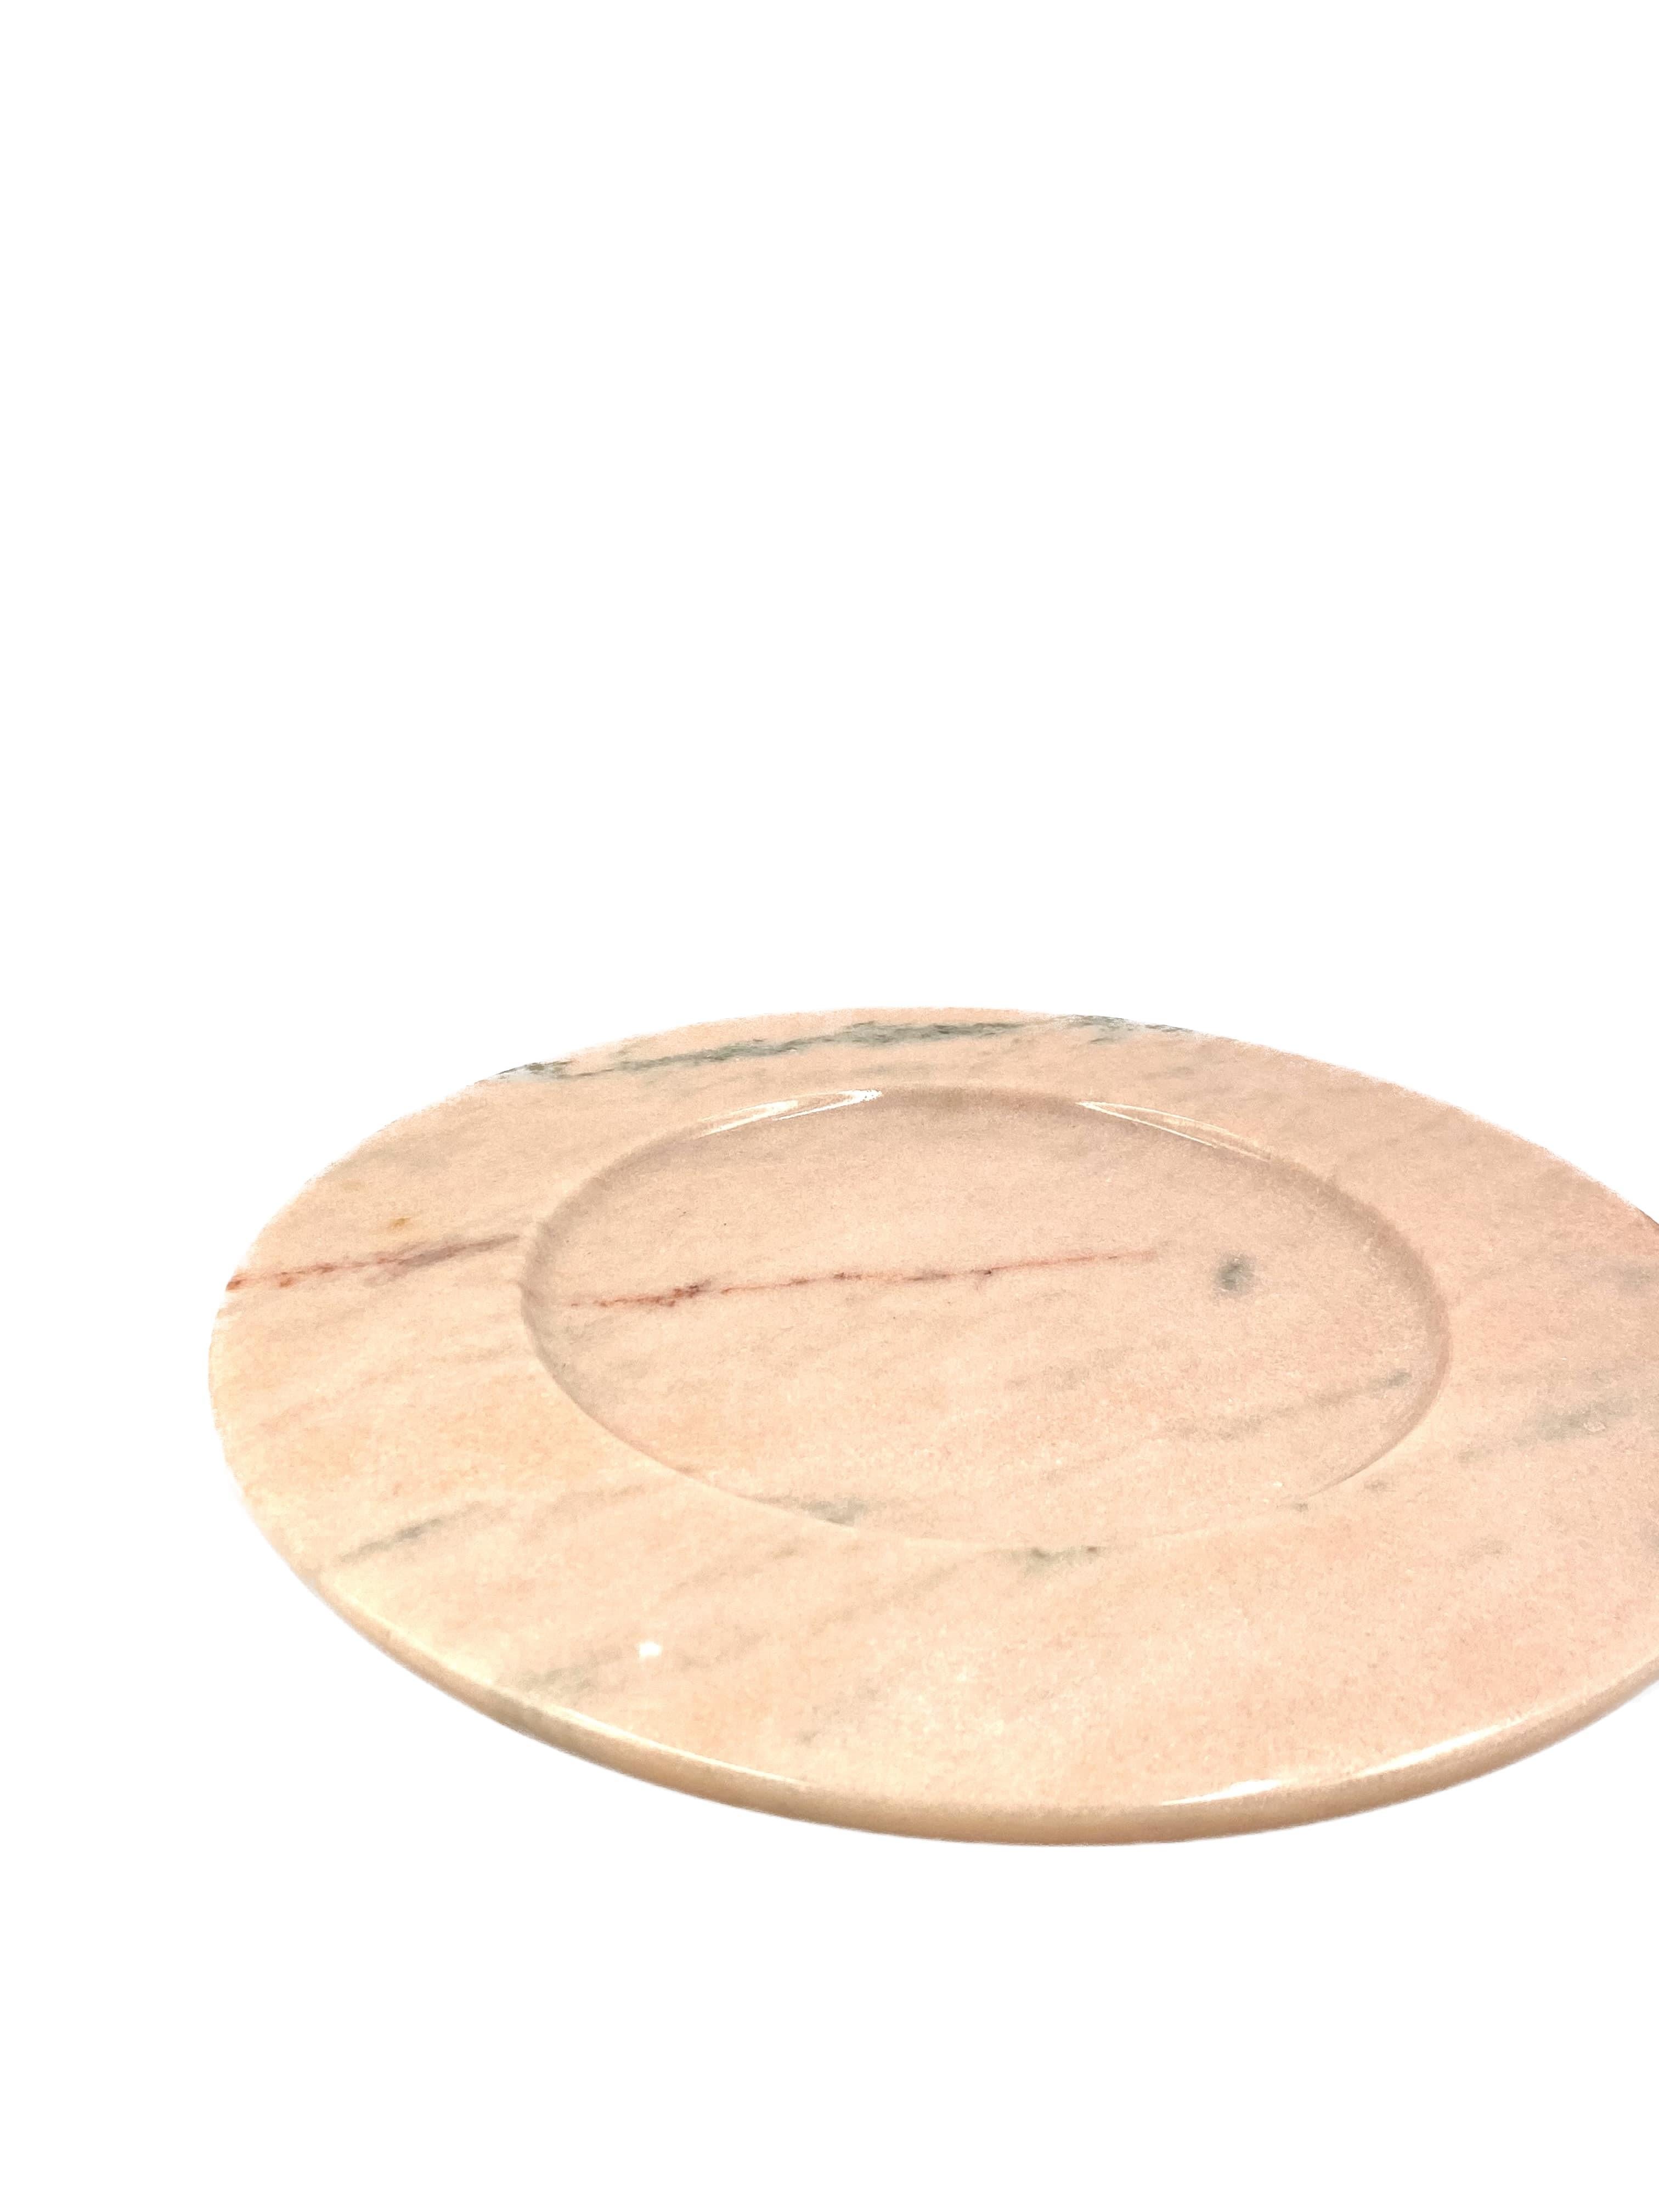 Pink Marble Centerpiece / Tray, Up&Up Italy, 1970s For Sale 10